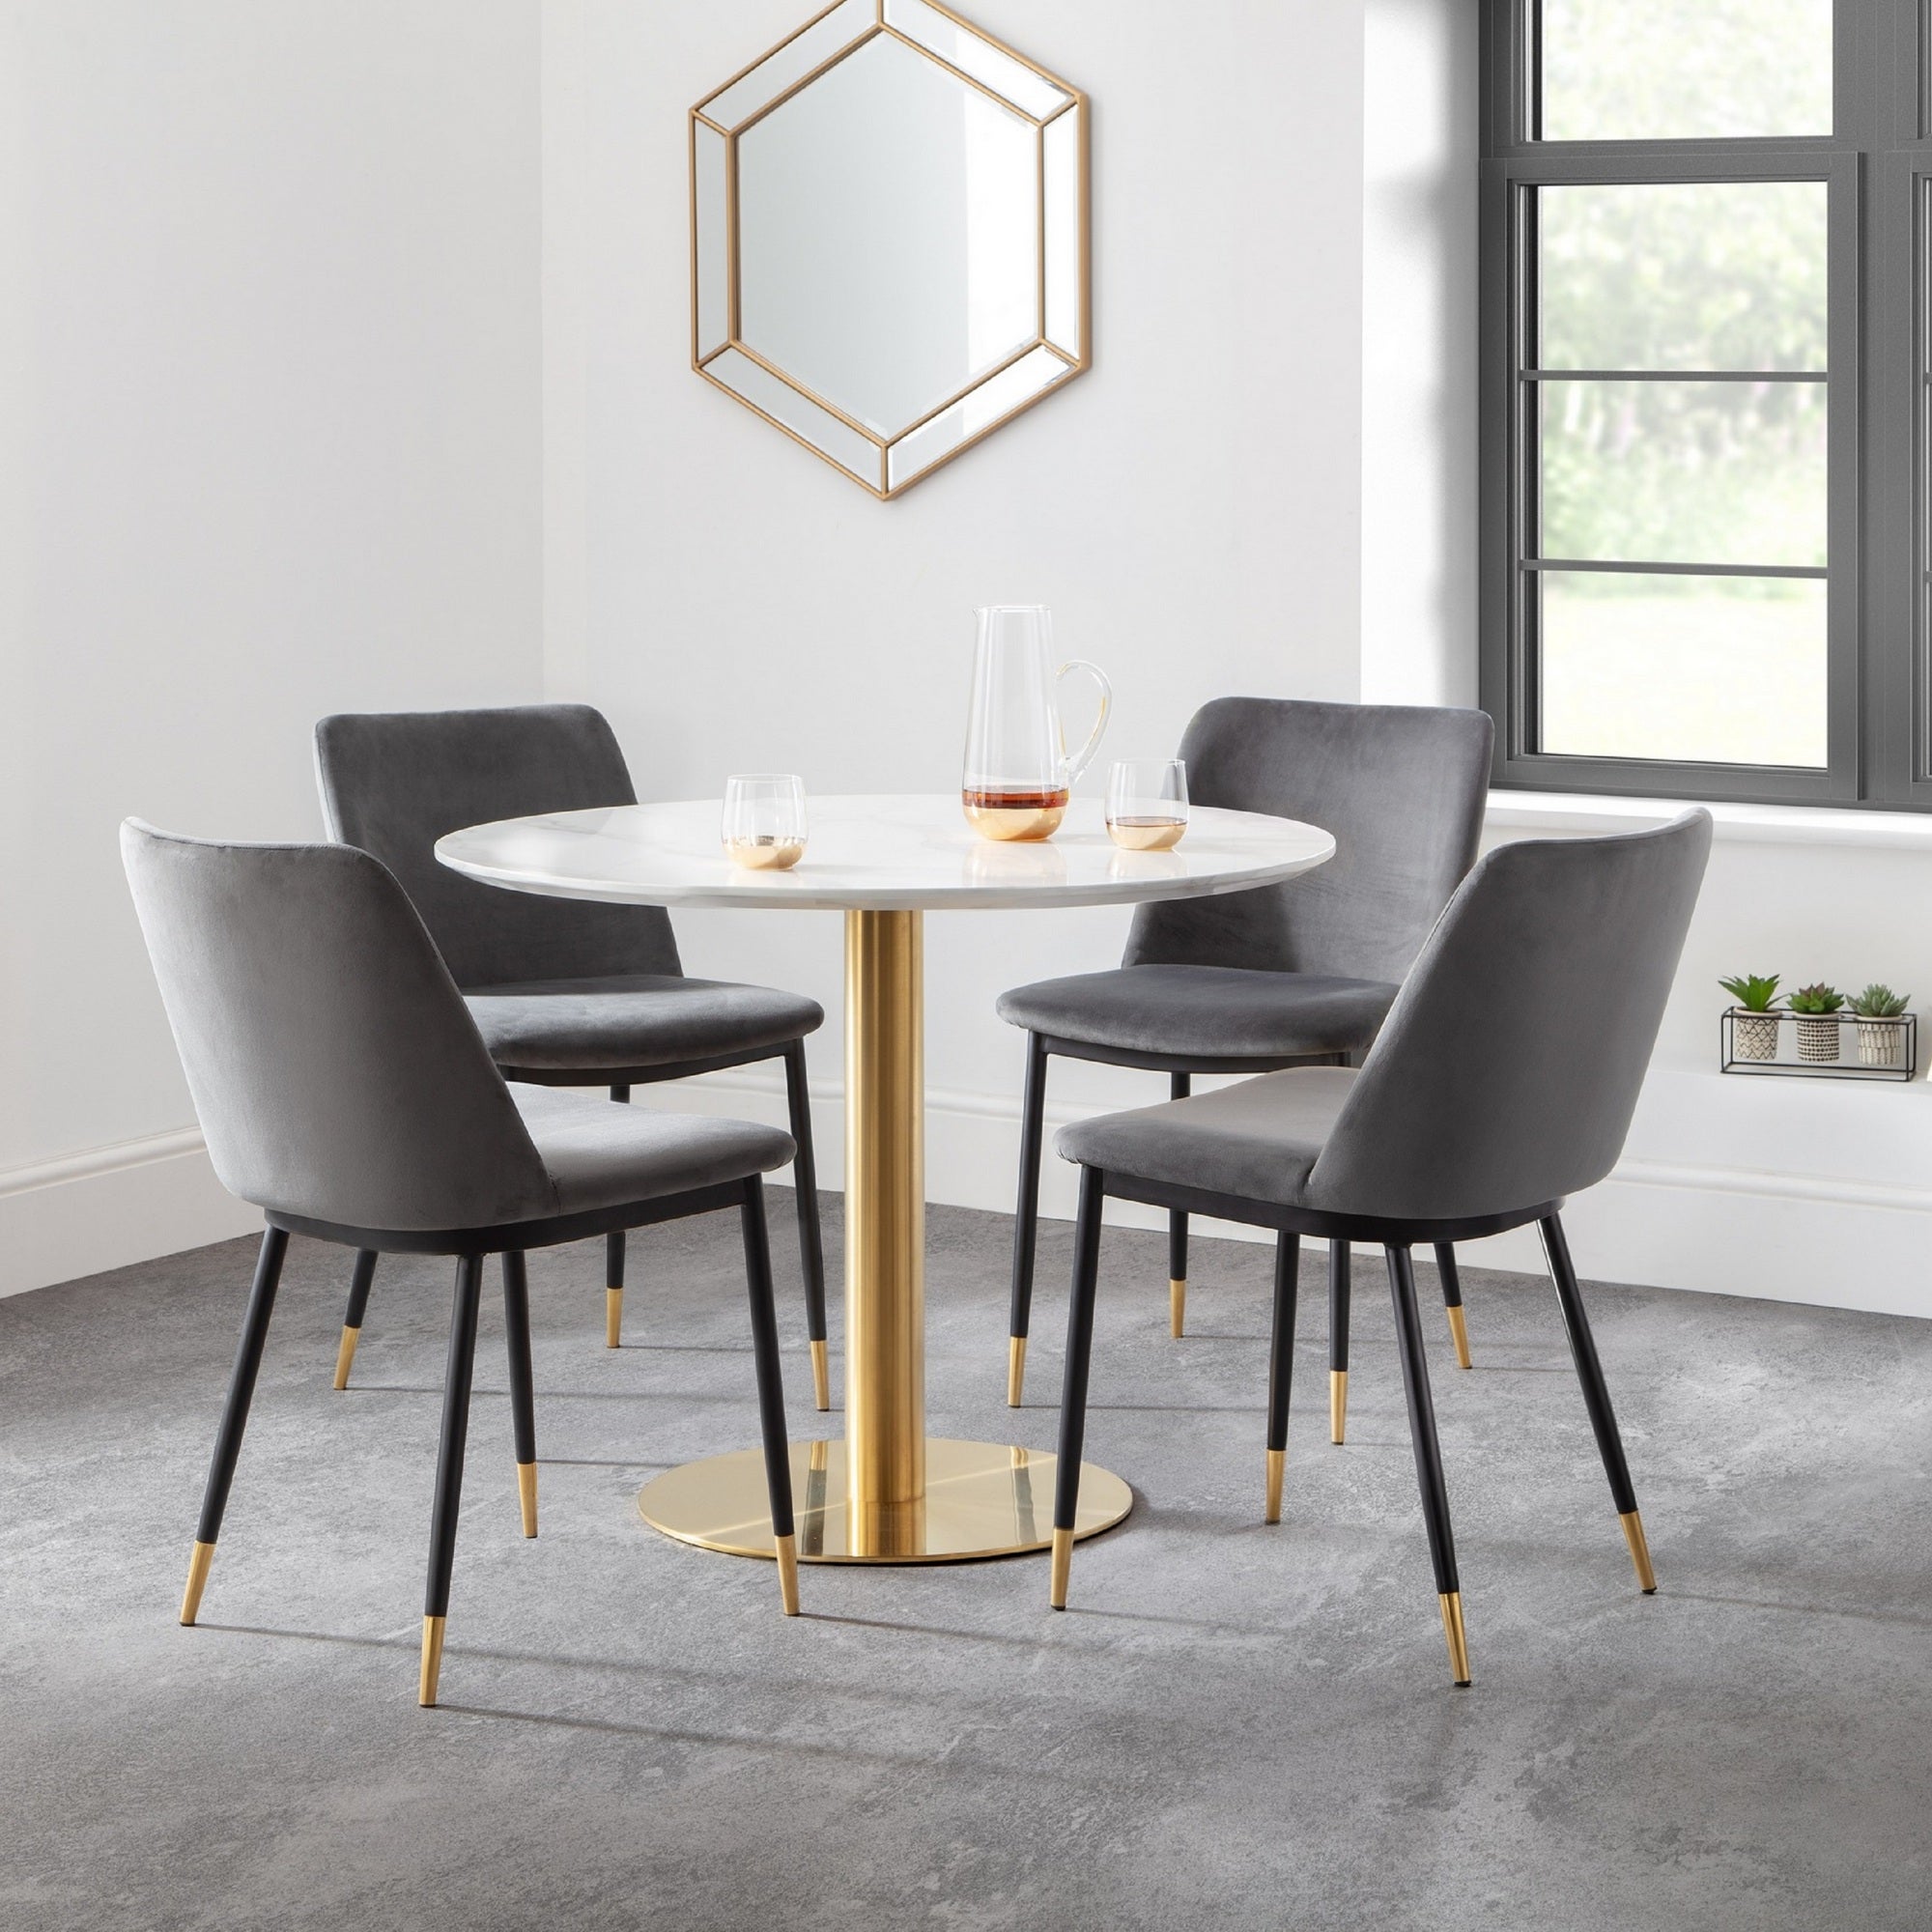 Palermo Round Dining Table With 4 Delaunay Chairs Grey